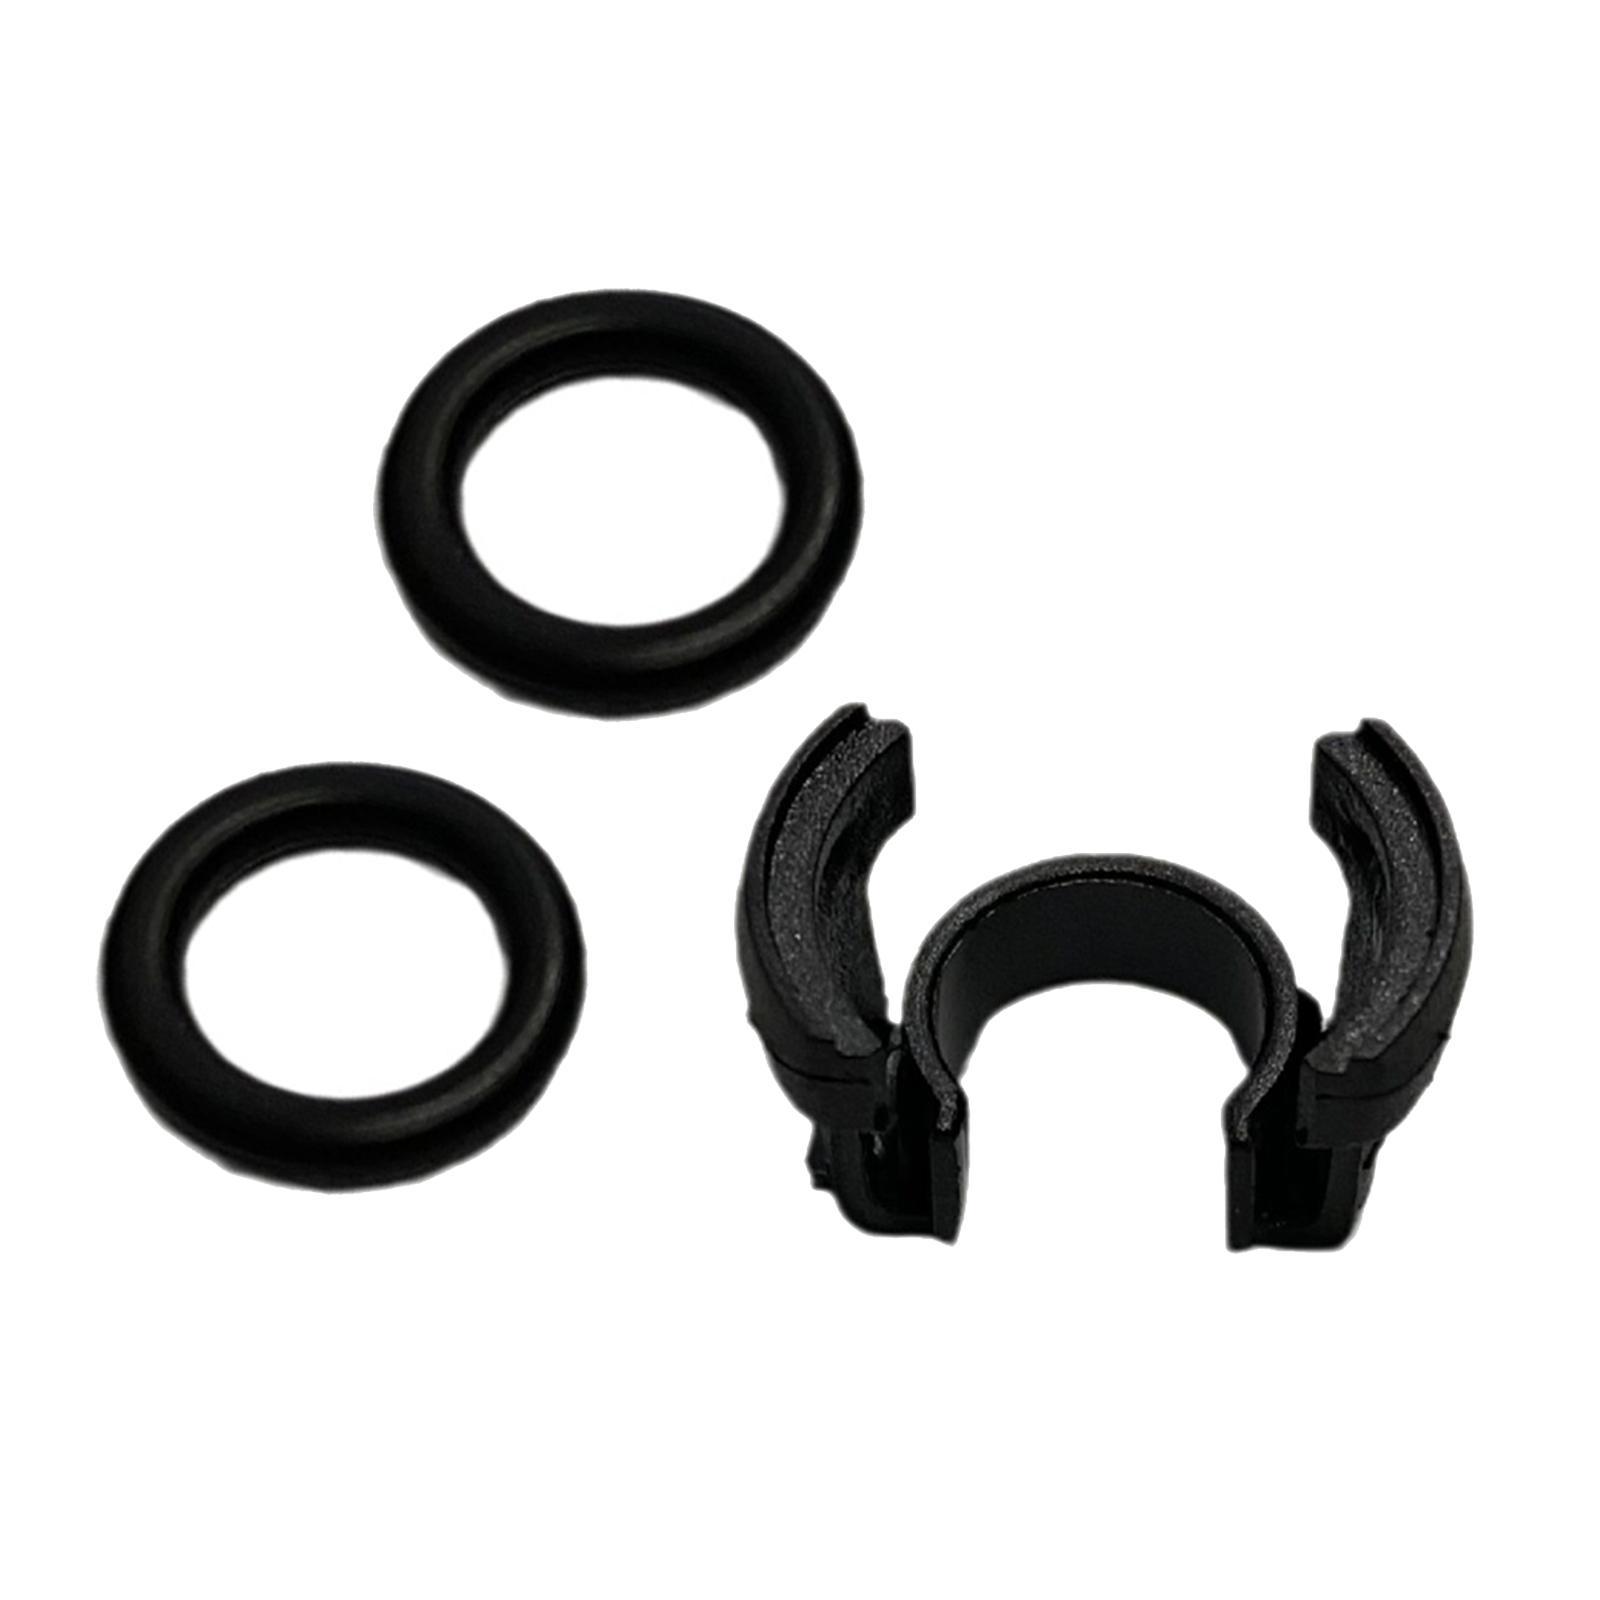 A/C Condensing Pipe Clamp Refrigeration Pipe Clamp 88718-1E150 Replacement Parts Condenser Fixing Snap for